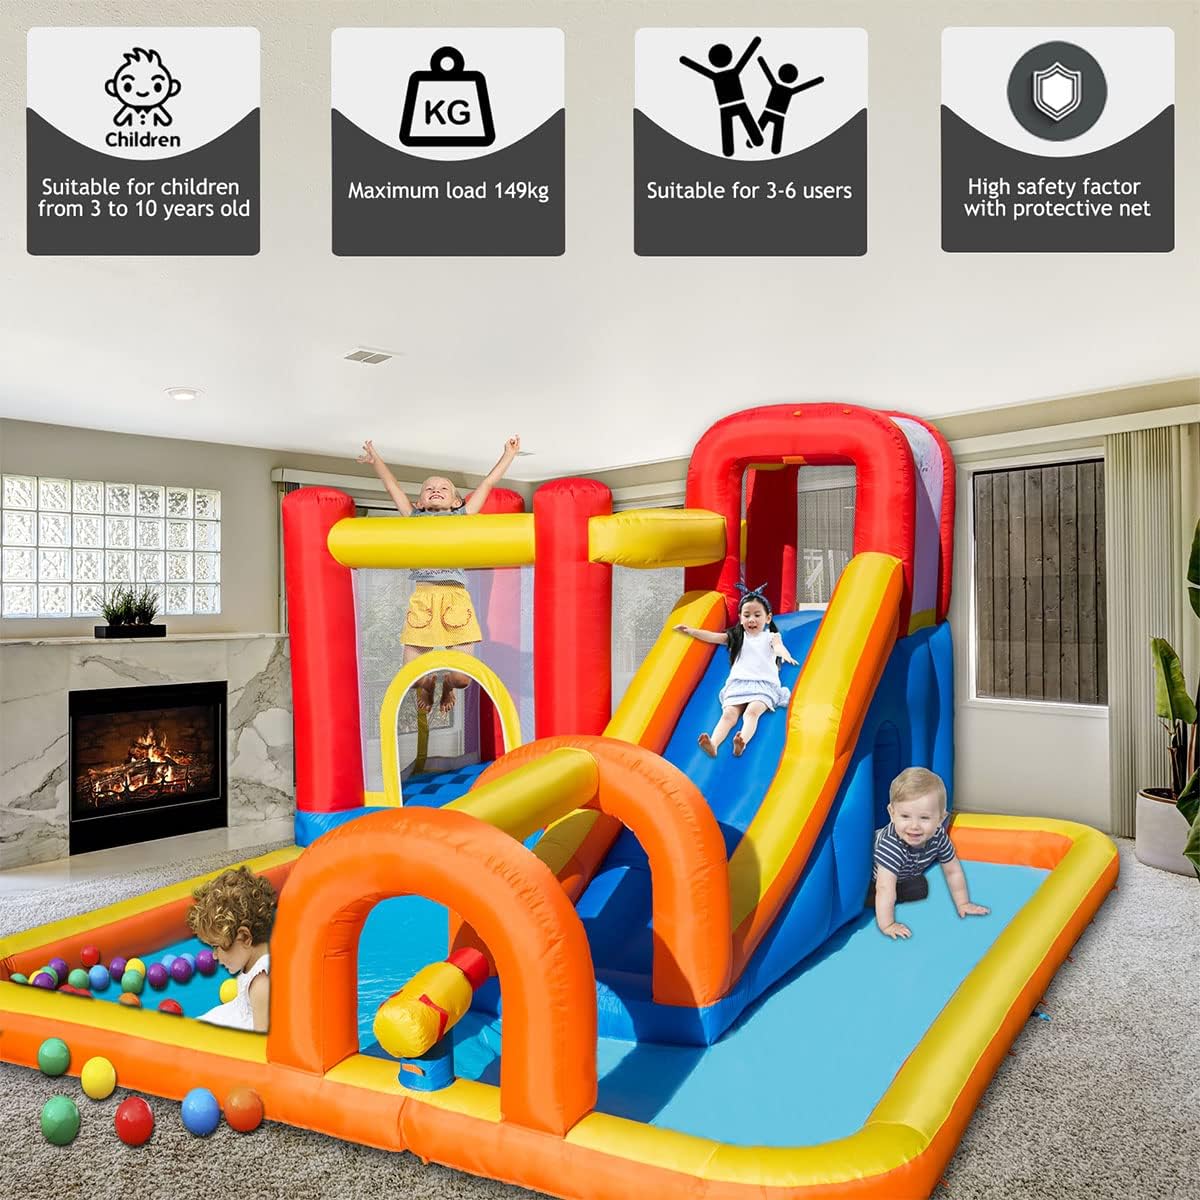 Baralir Inflatable Bouncy Castle, Large Inflatable Bounce House Water Slide Trampoline Splashing Pool Climbing Wall with Air Blower for Kids Outdoor Indoor Play, 3.96 x 3.2 x 1.96m